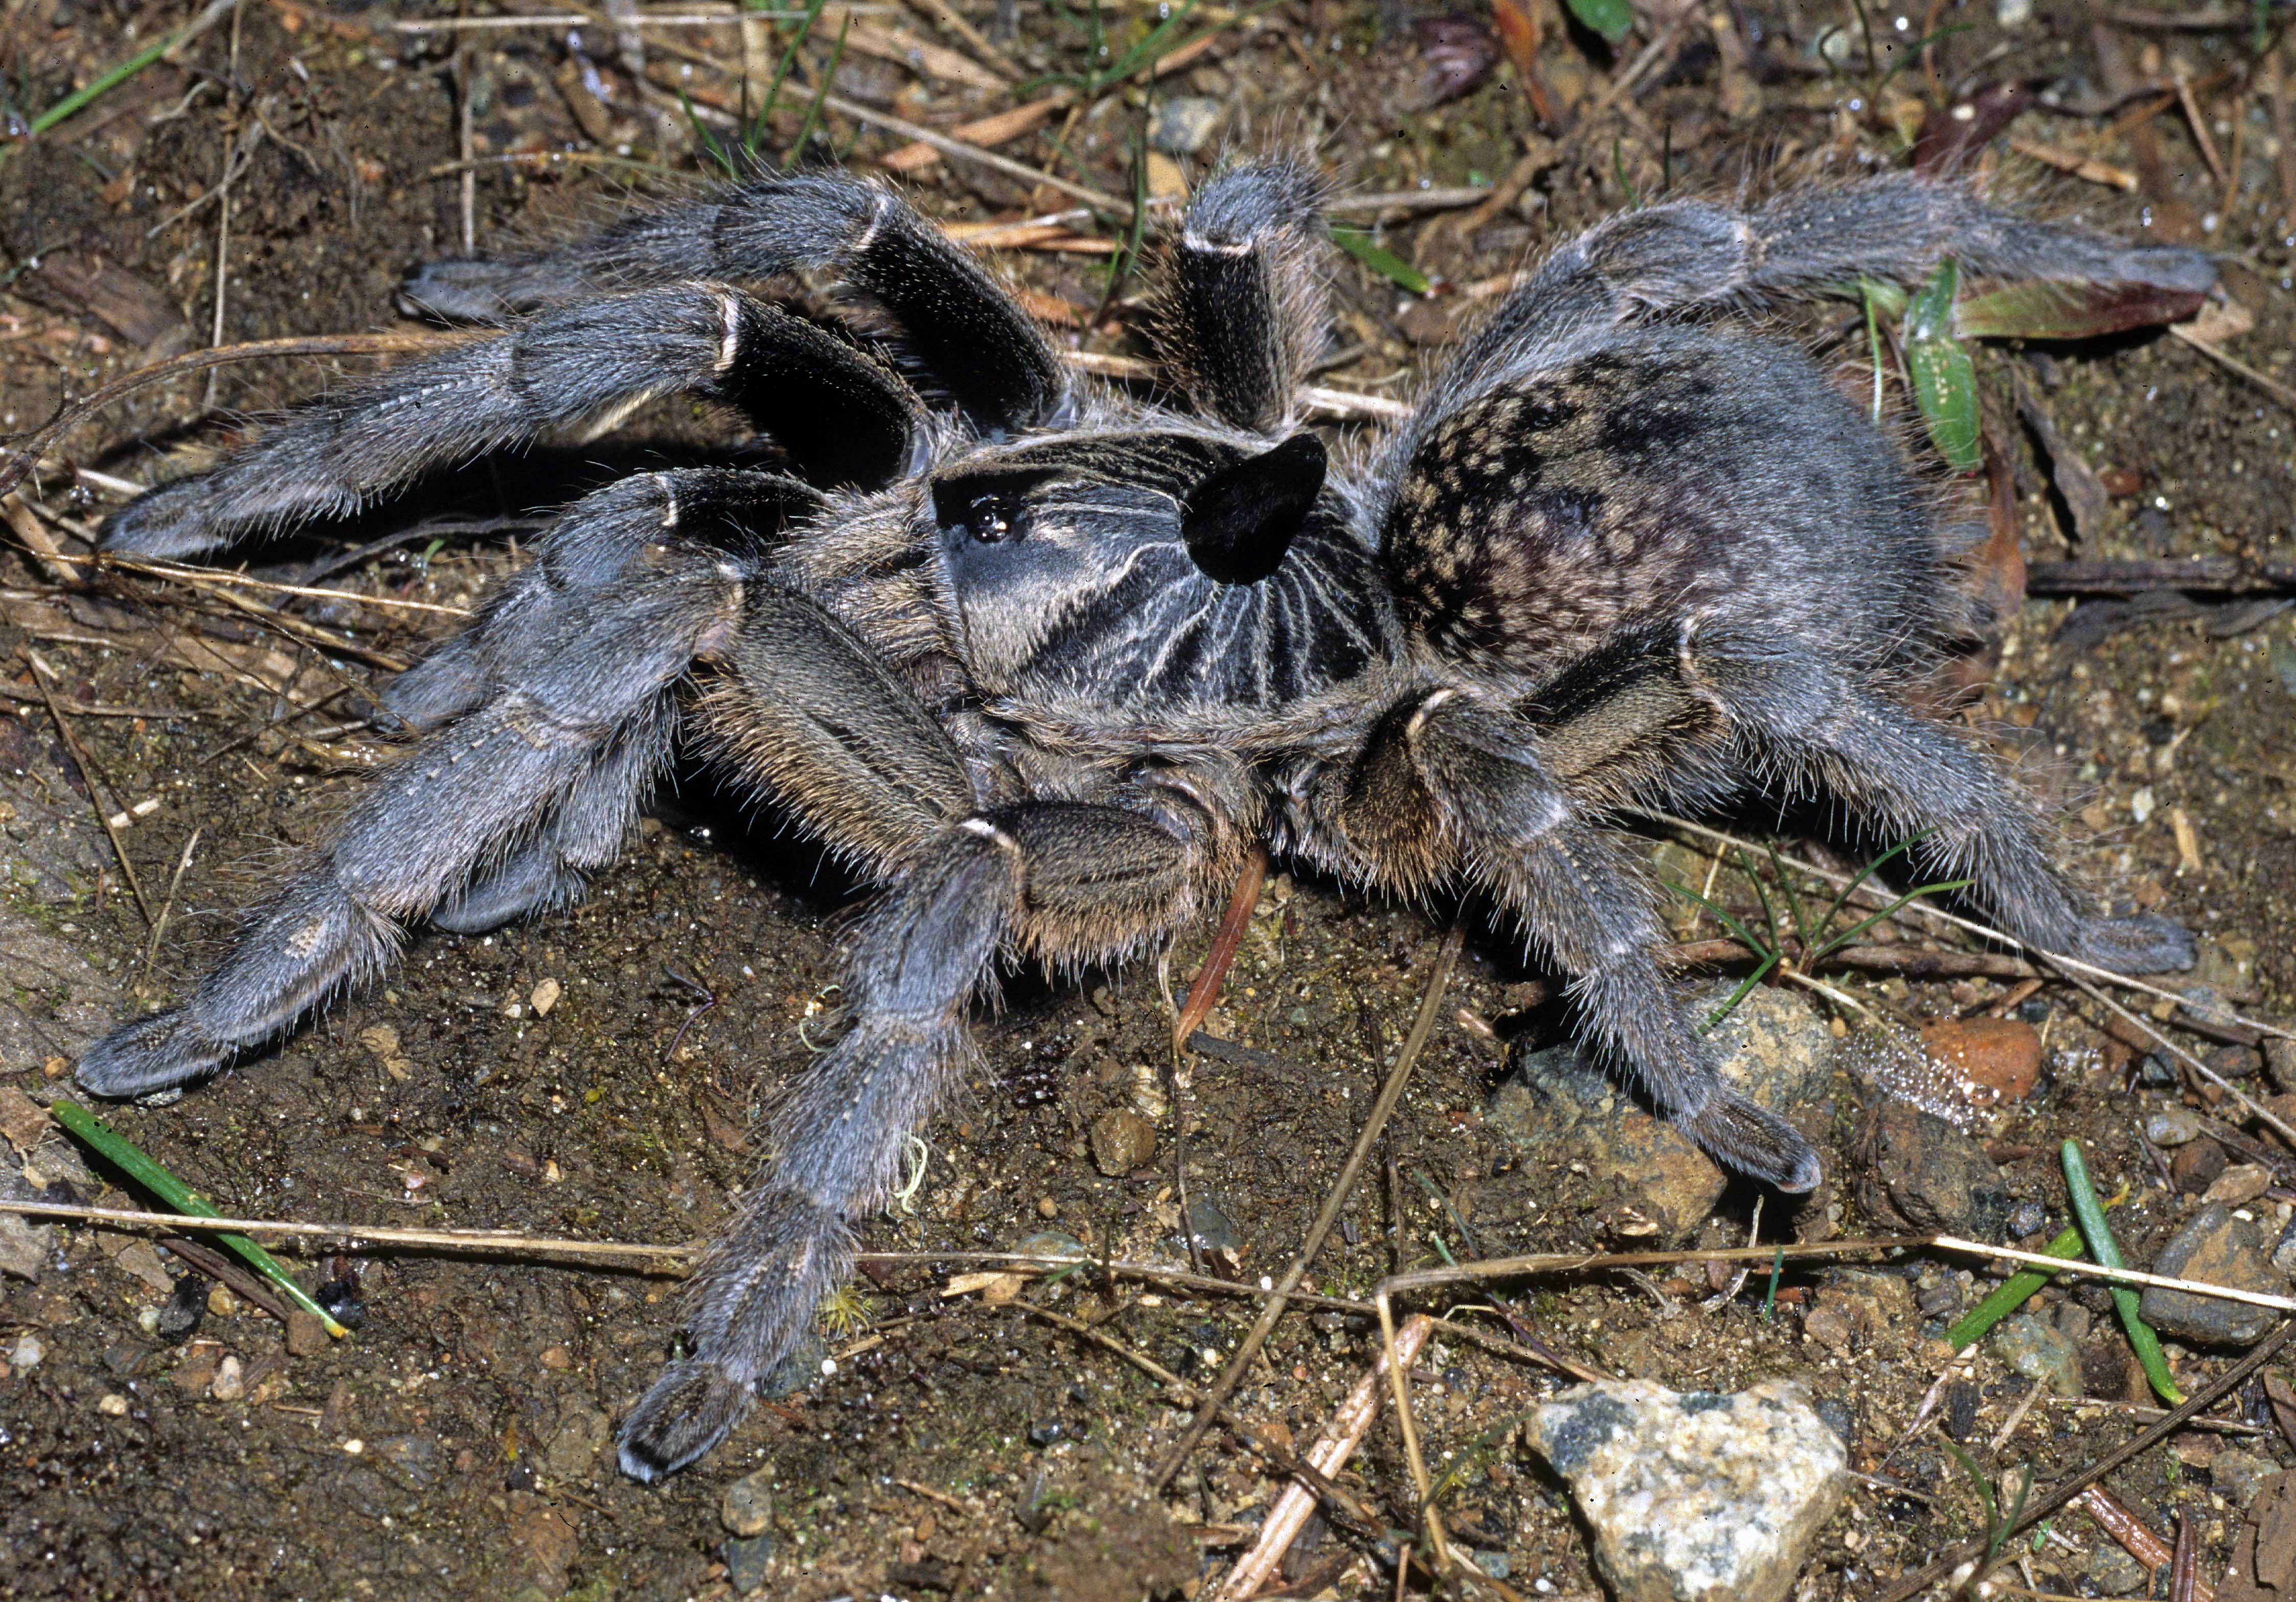 Picture of Ceratogyrus marshalli (Great Horned Baboon Spider) - Female - Dorsal